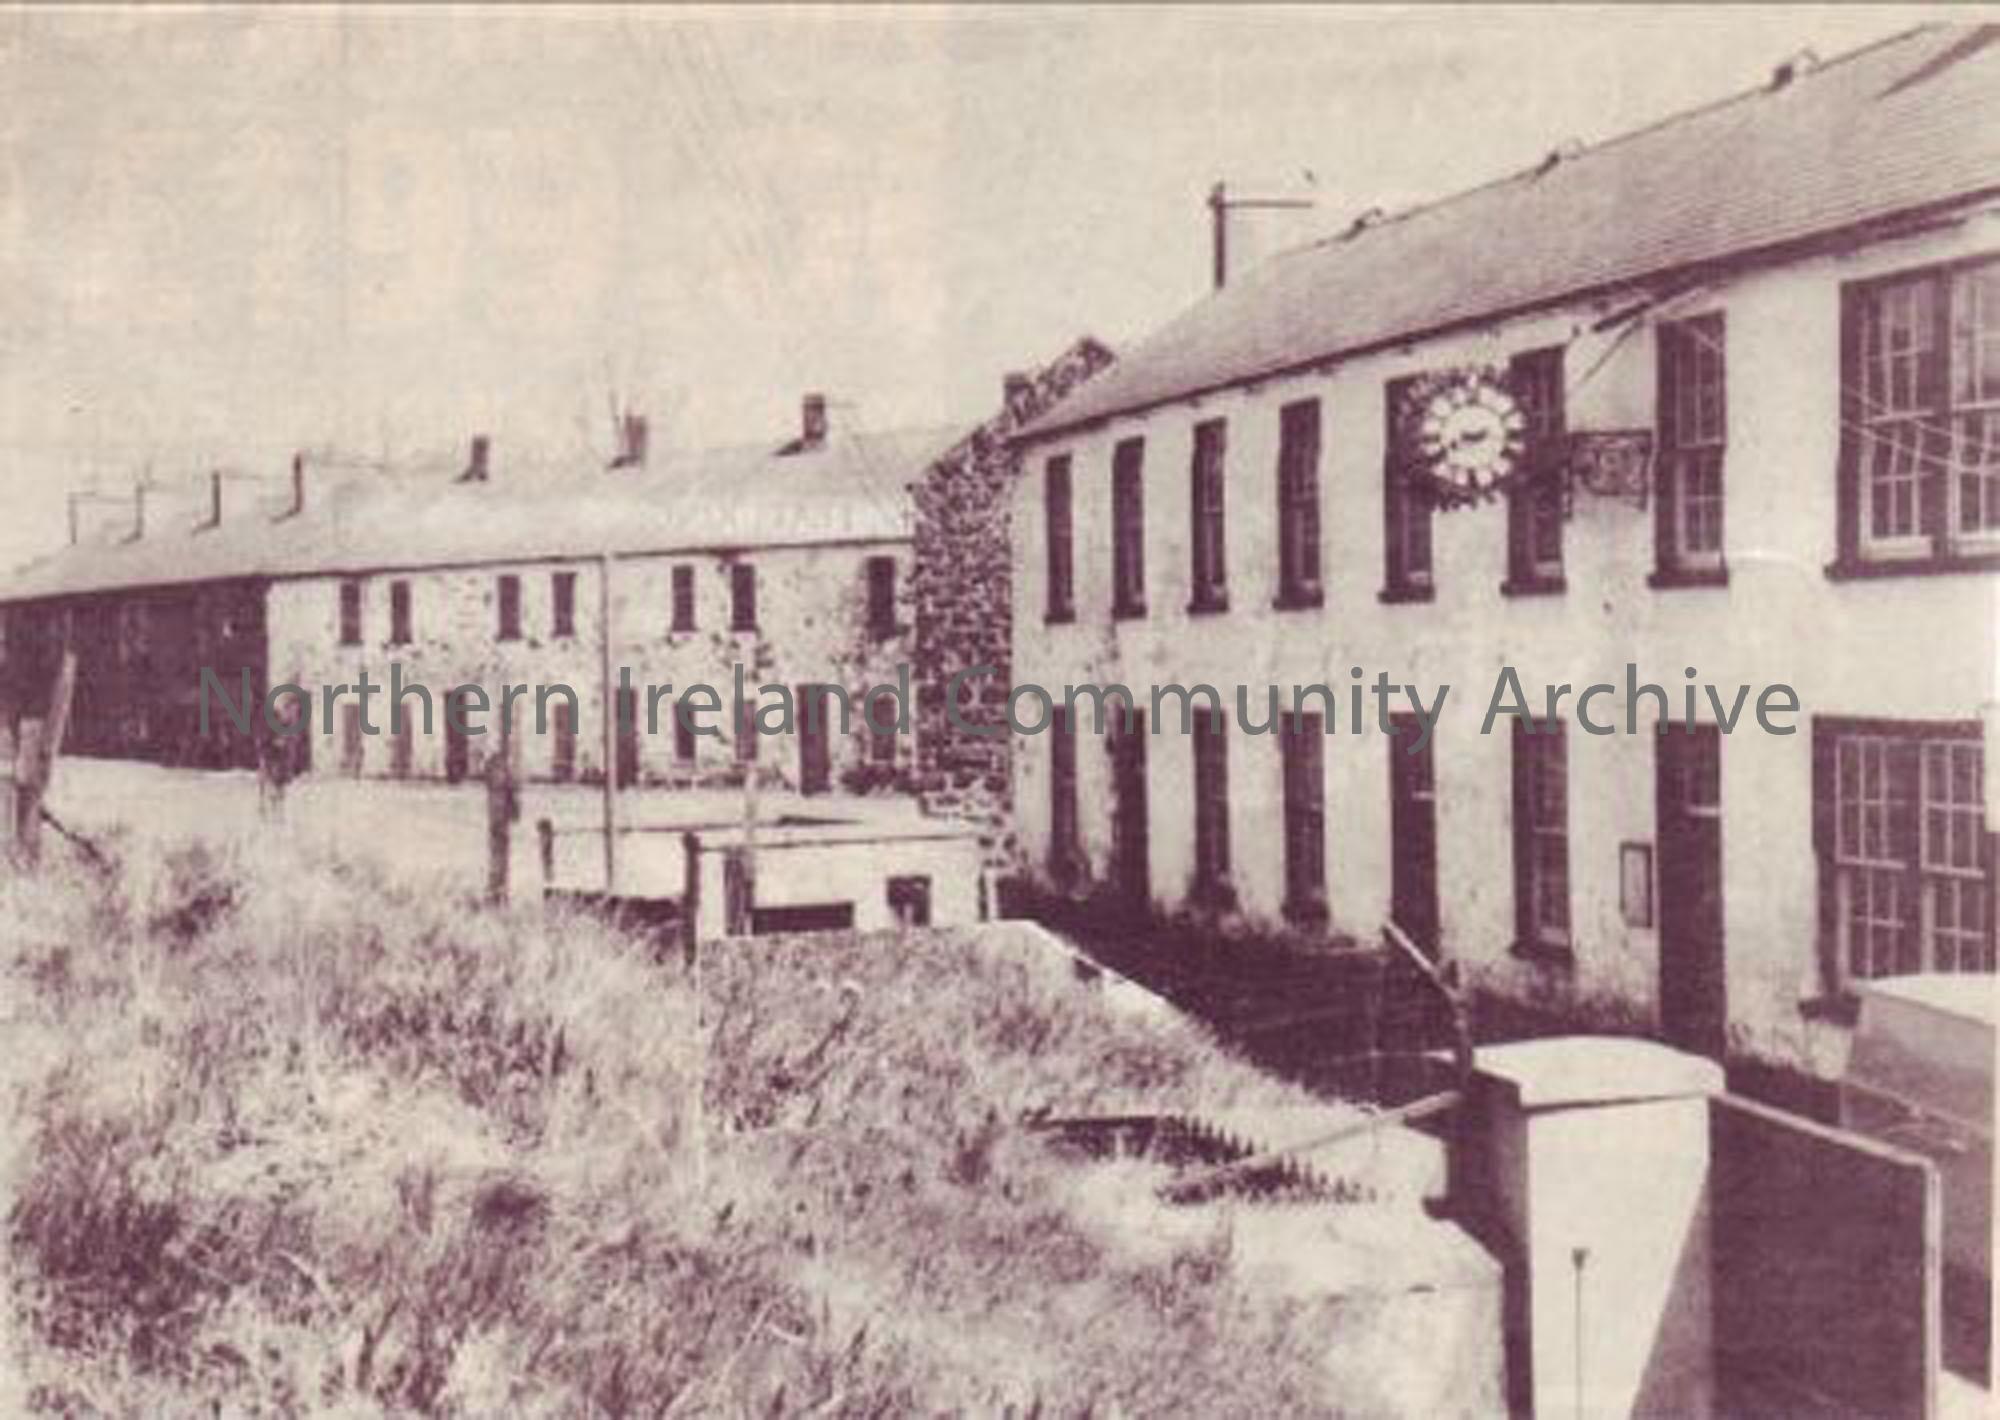 Mill workers houses in Balnamore Mill. The building on the right had 2 houses and the canteen on the ground floor, with a large hall and a school house on the first floor, where the clock is. You can also see the gates into the mill in the foreground. (5026)